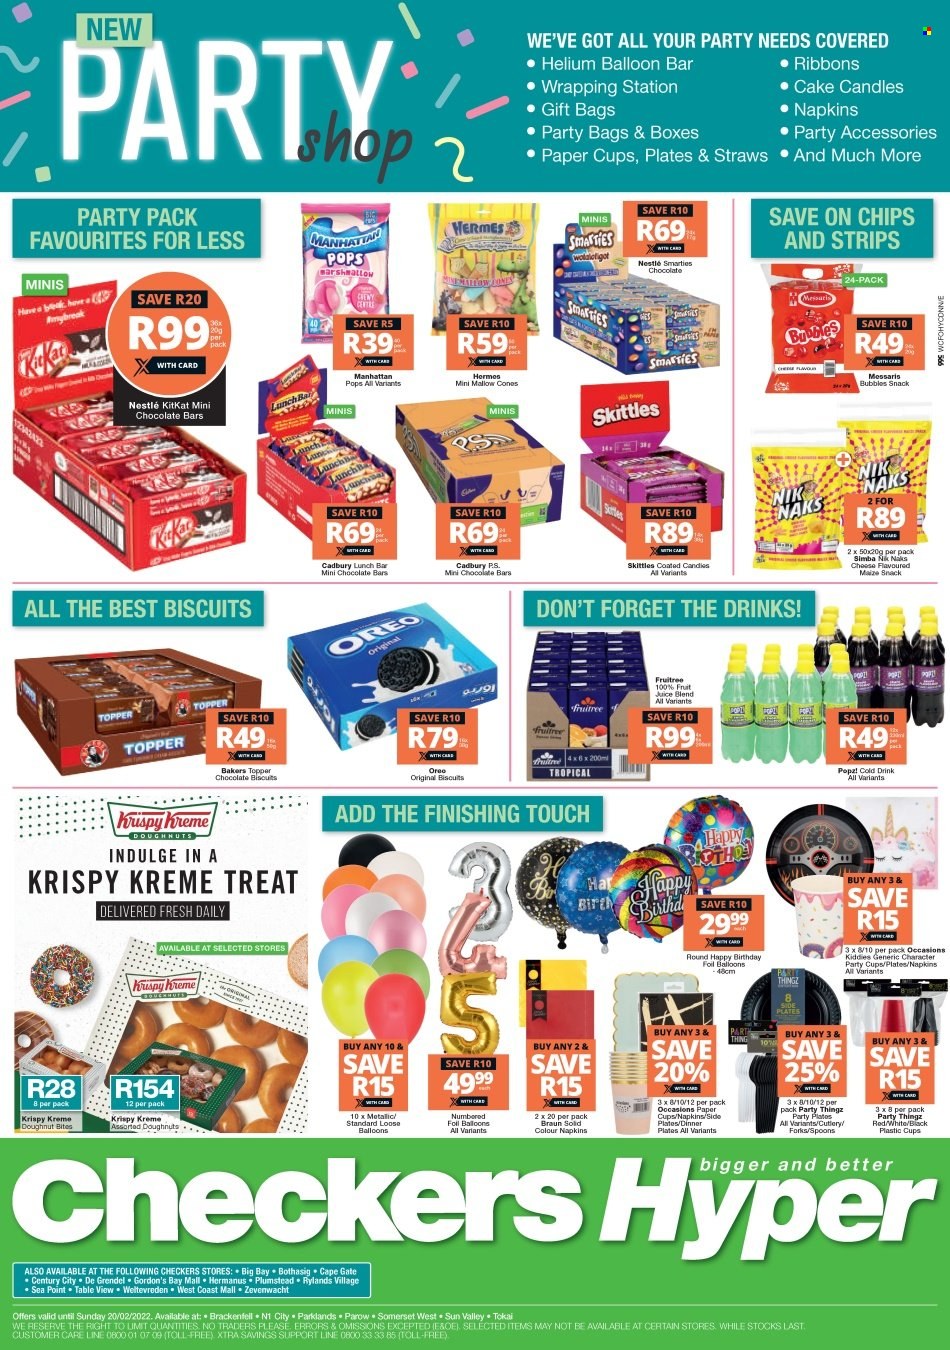 Checkers catalogue  - 10/01/2022 - 20/02/2022 - Sales products - donut, cheese, Oreo, strips, Nestlé, snack, KitKat, candy, Smarties, biscuit, Cadbury, Skittles, chocolate bar, chips, maize snack, Simba, Nik Naks, fruit juice, juice, Gordon's, napkins, spoon, plate, cup, dinner plate, straw, paper, balloons, candle, party cups, ribbon, topper, Bakers. Page 1.